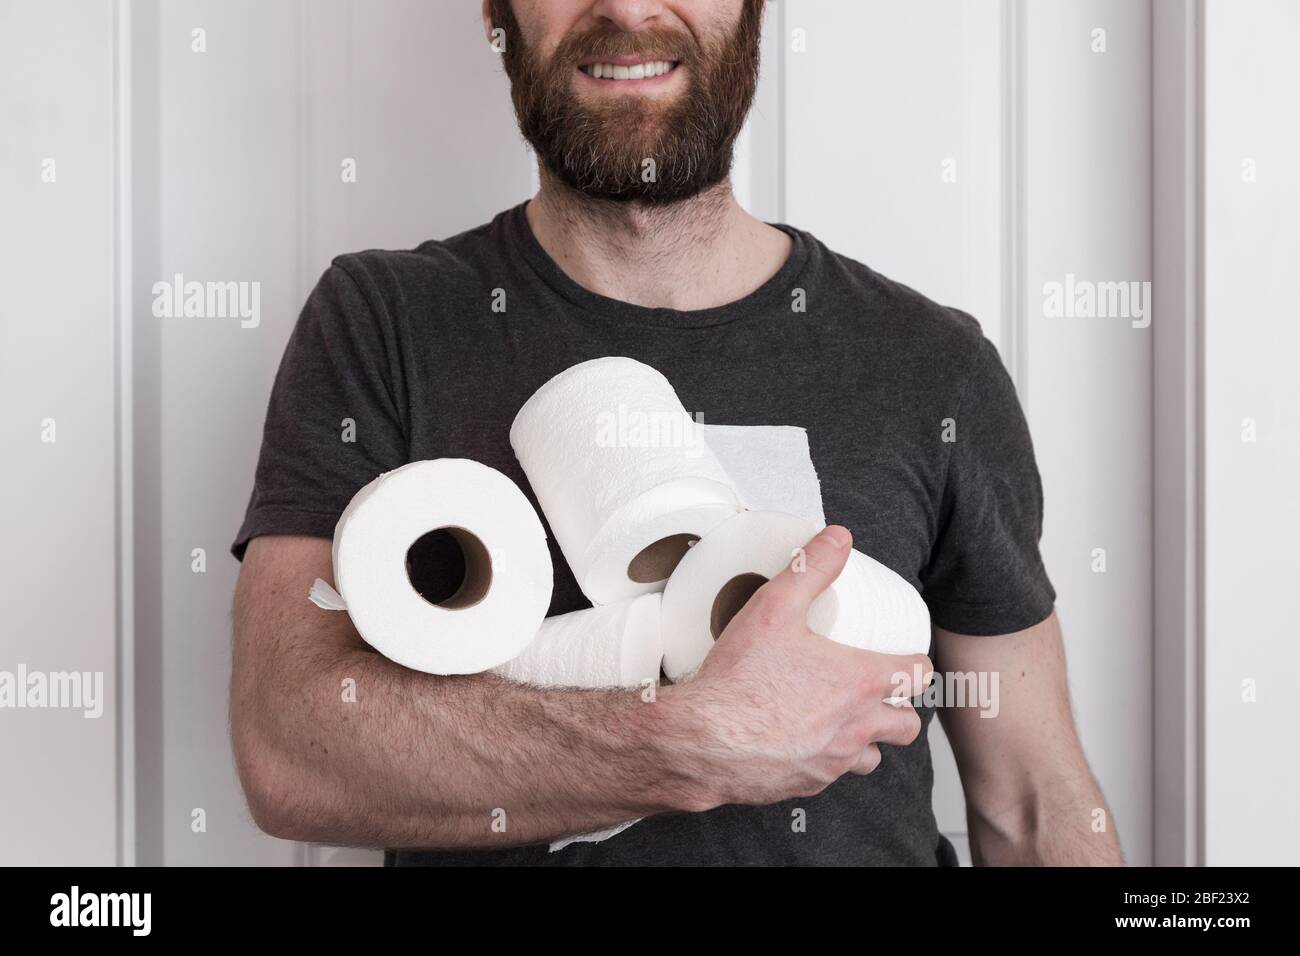 A smiling caucasian man holding rolls of toilet paper the he hoarded. Stock Photo